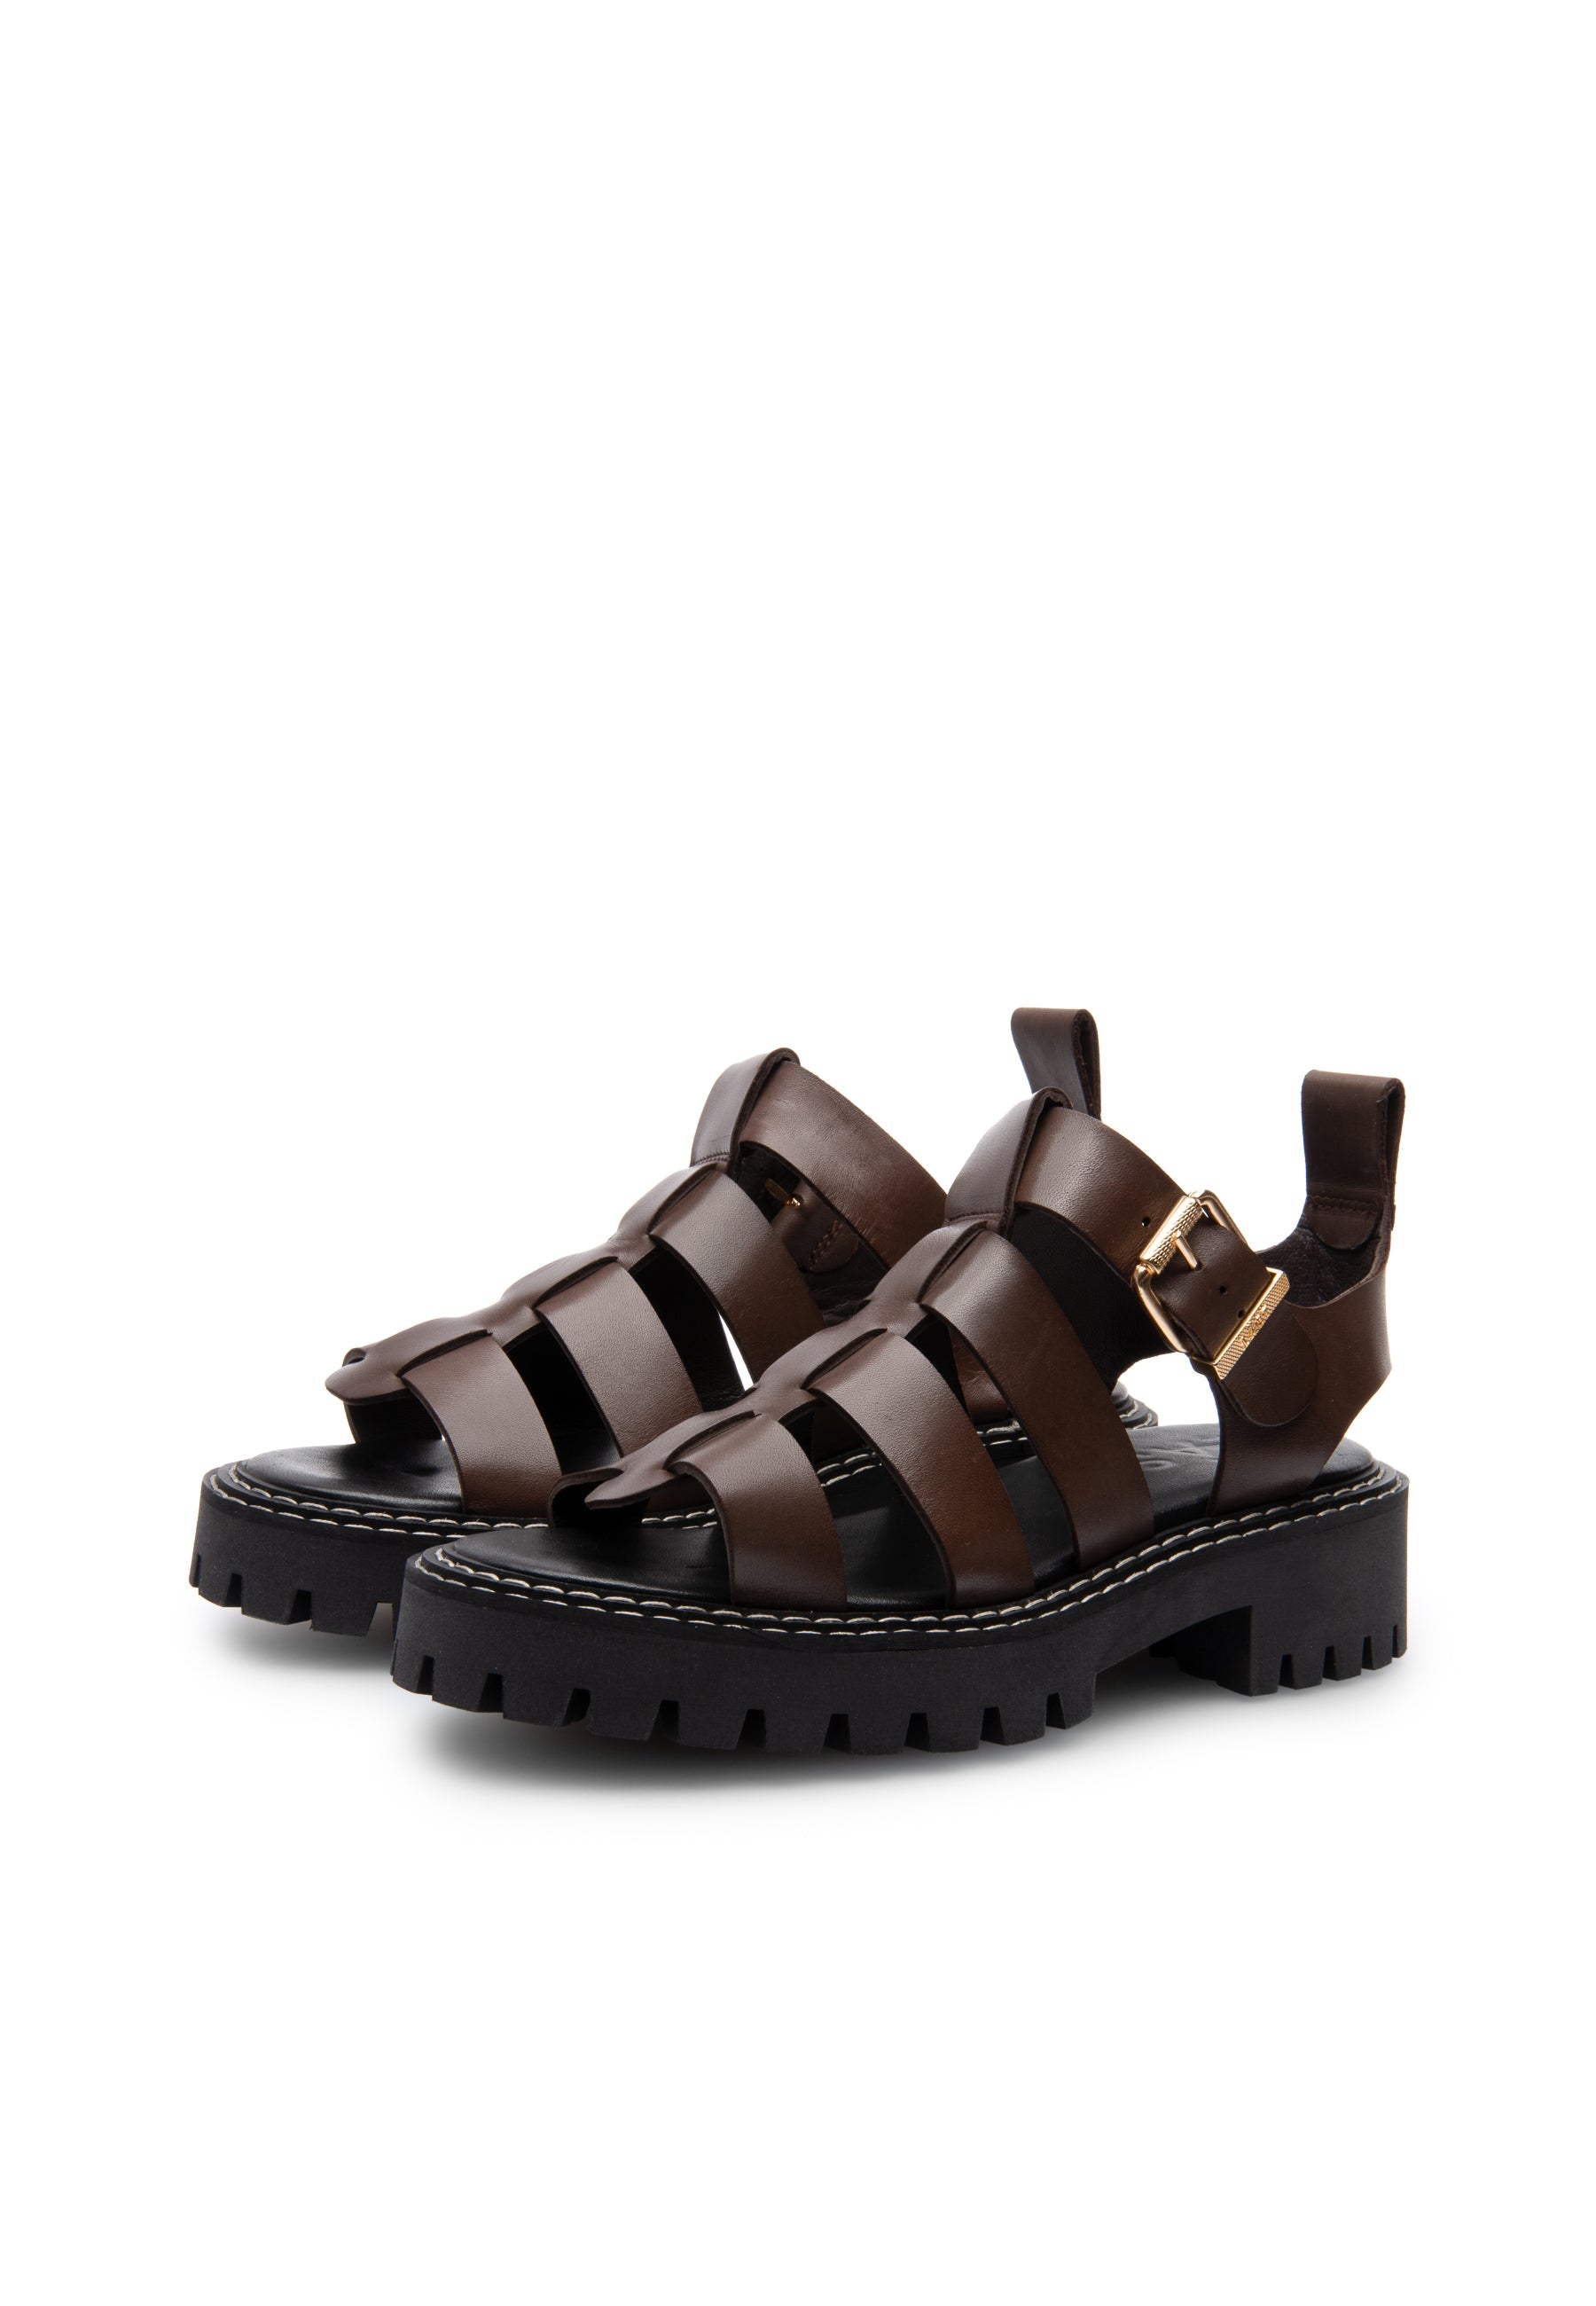 Daphny Brown Leather Chunky Sandals LAST1519 - 3